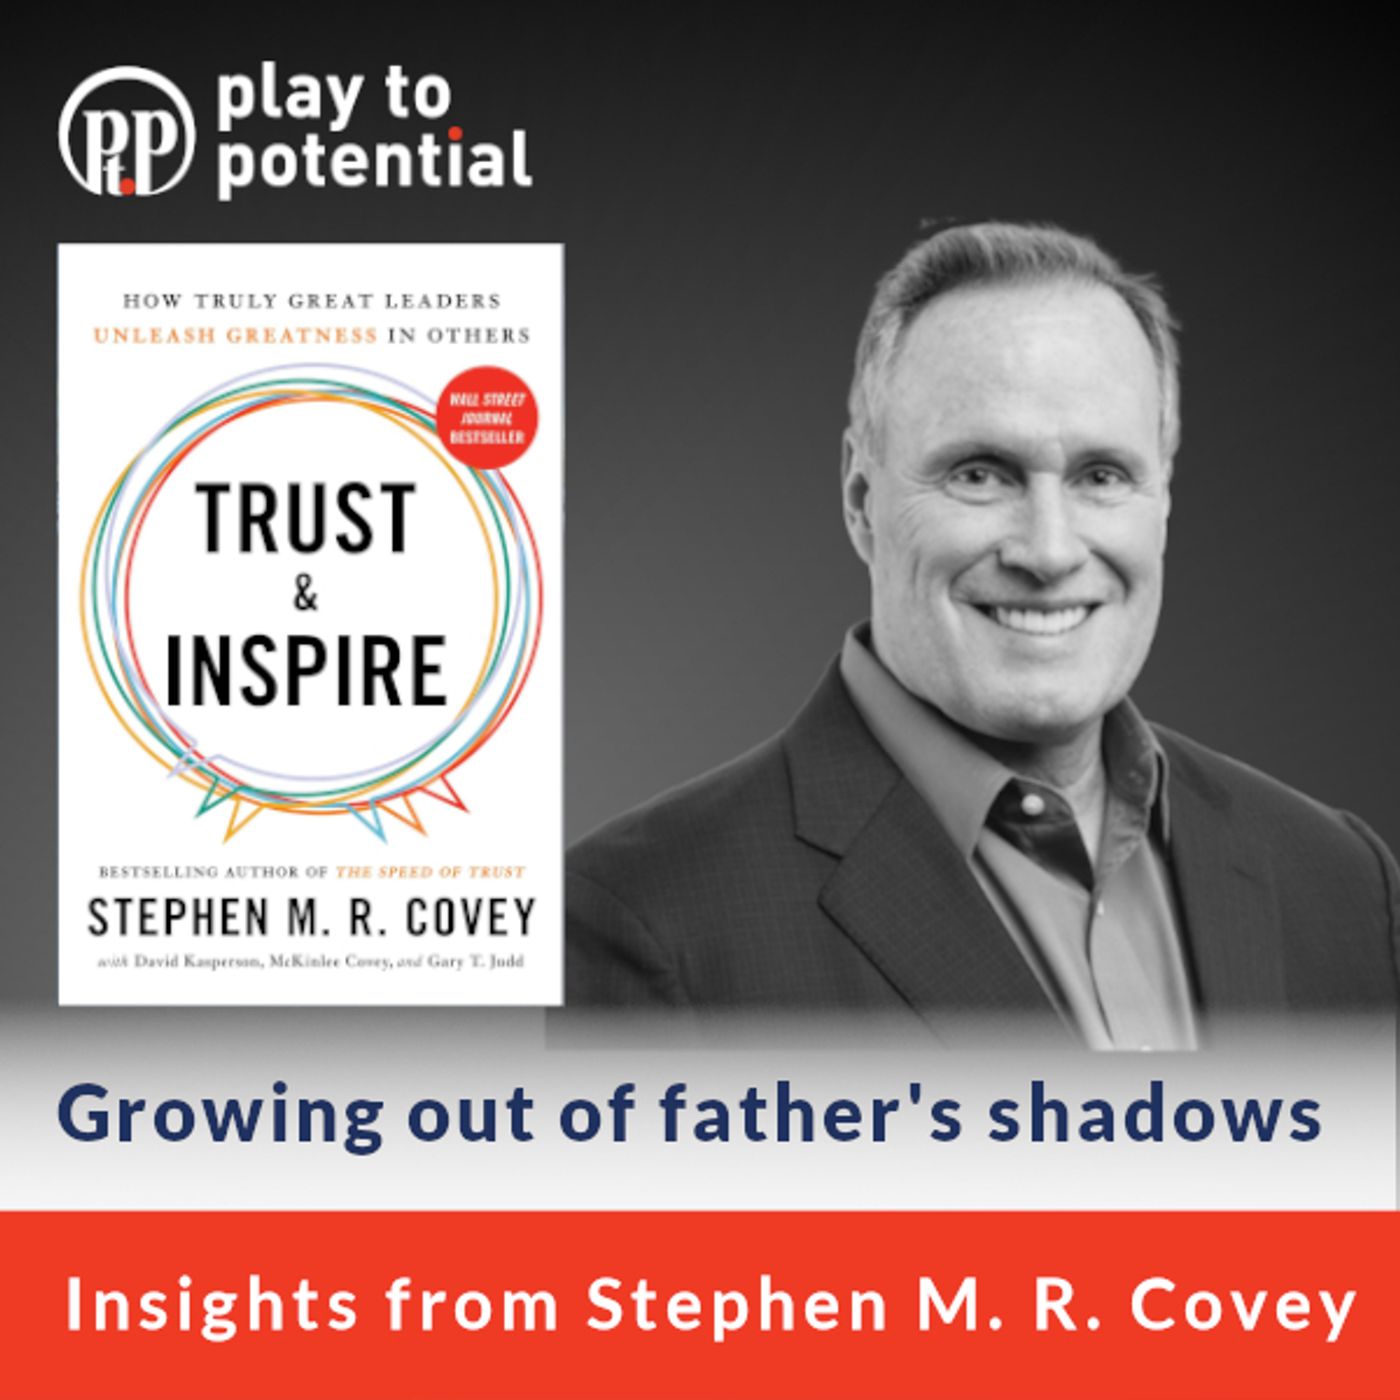 675: 101.1 Stephen M.R. Covey - Growing out of father's shadows